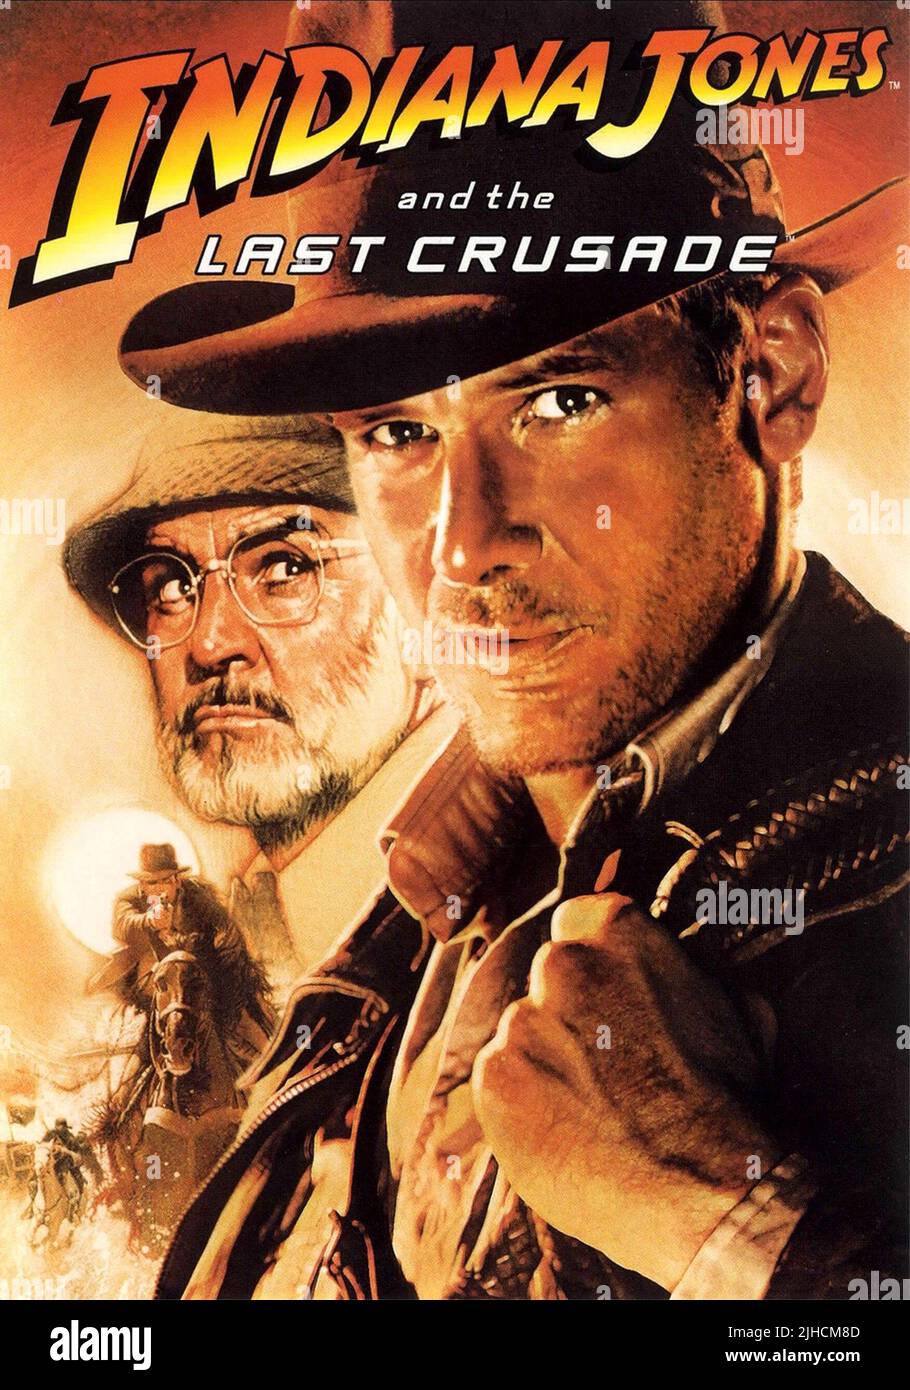 SEAN CONNERY, HARRISON FORD POSTER, INDIANA JONES AND THE LAST CRUSADE, 1989 Stock Photo